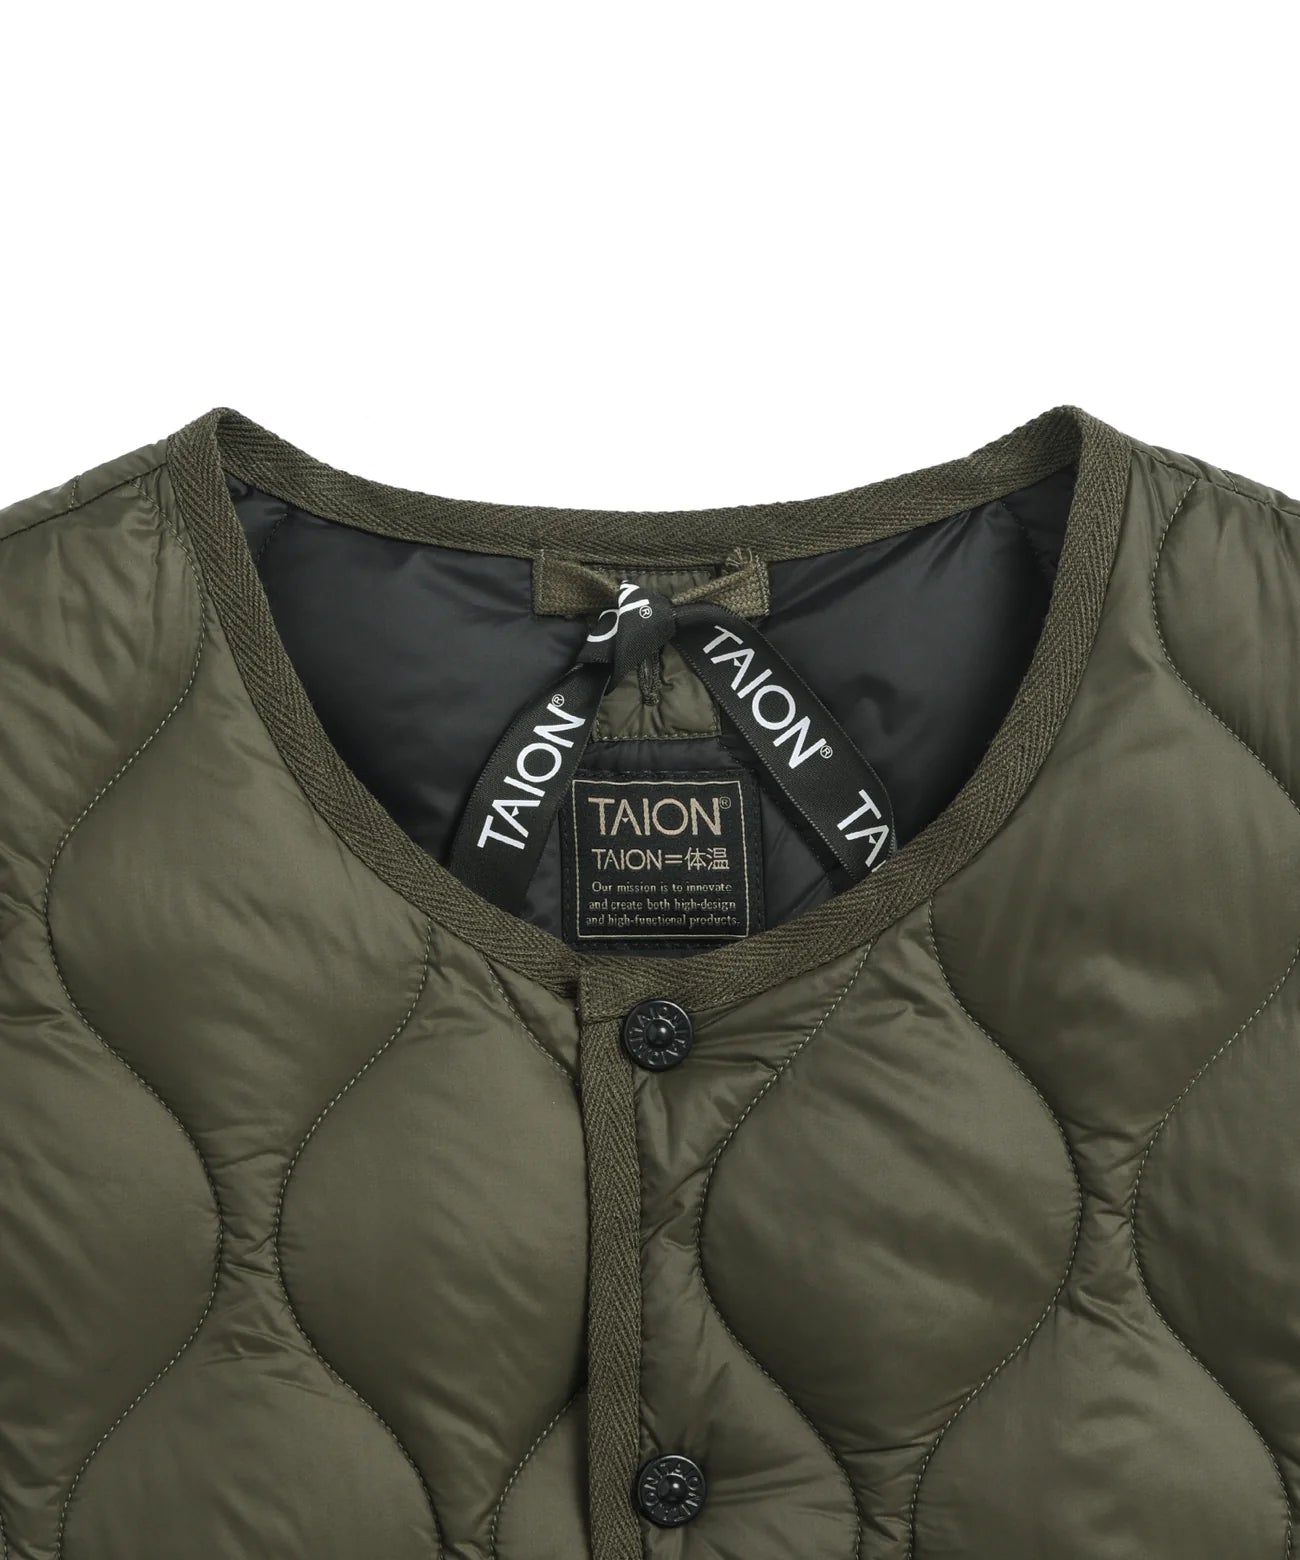 Taion Soft Shell Military Oversized Crew Neck Down Coat - Dark Olive